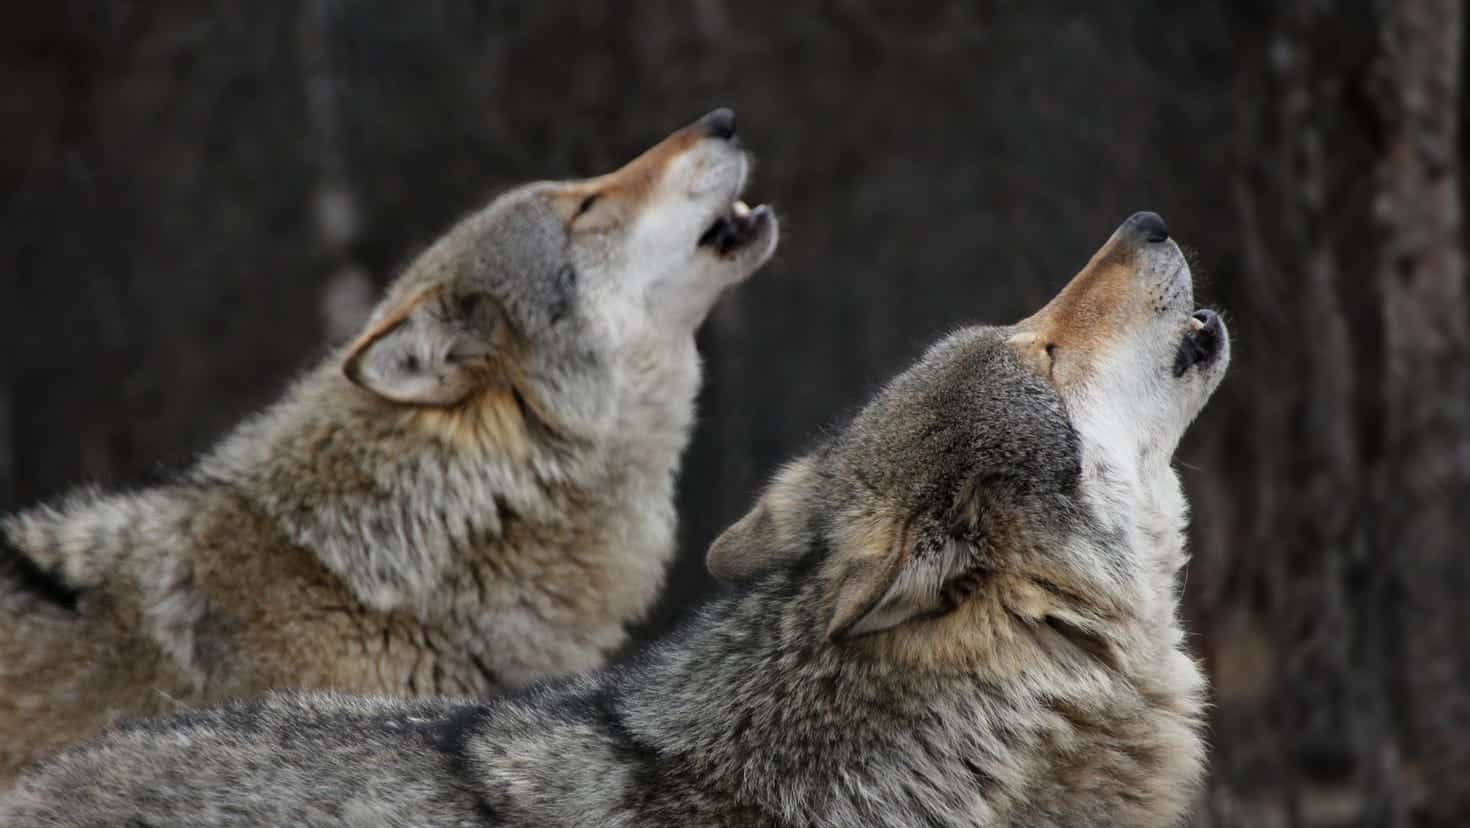 POLL: Should wolves be classified as predators to allow year-round hunting?